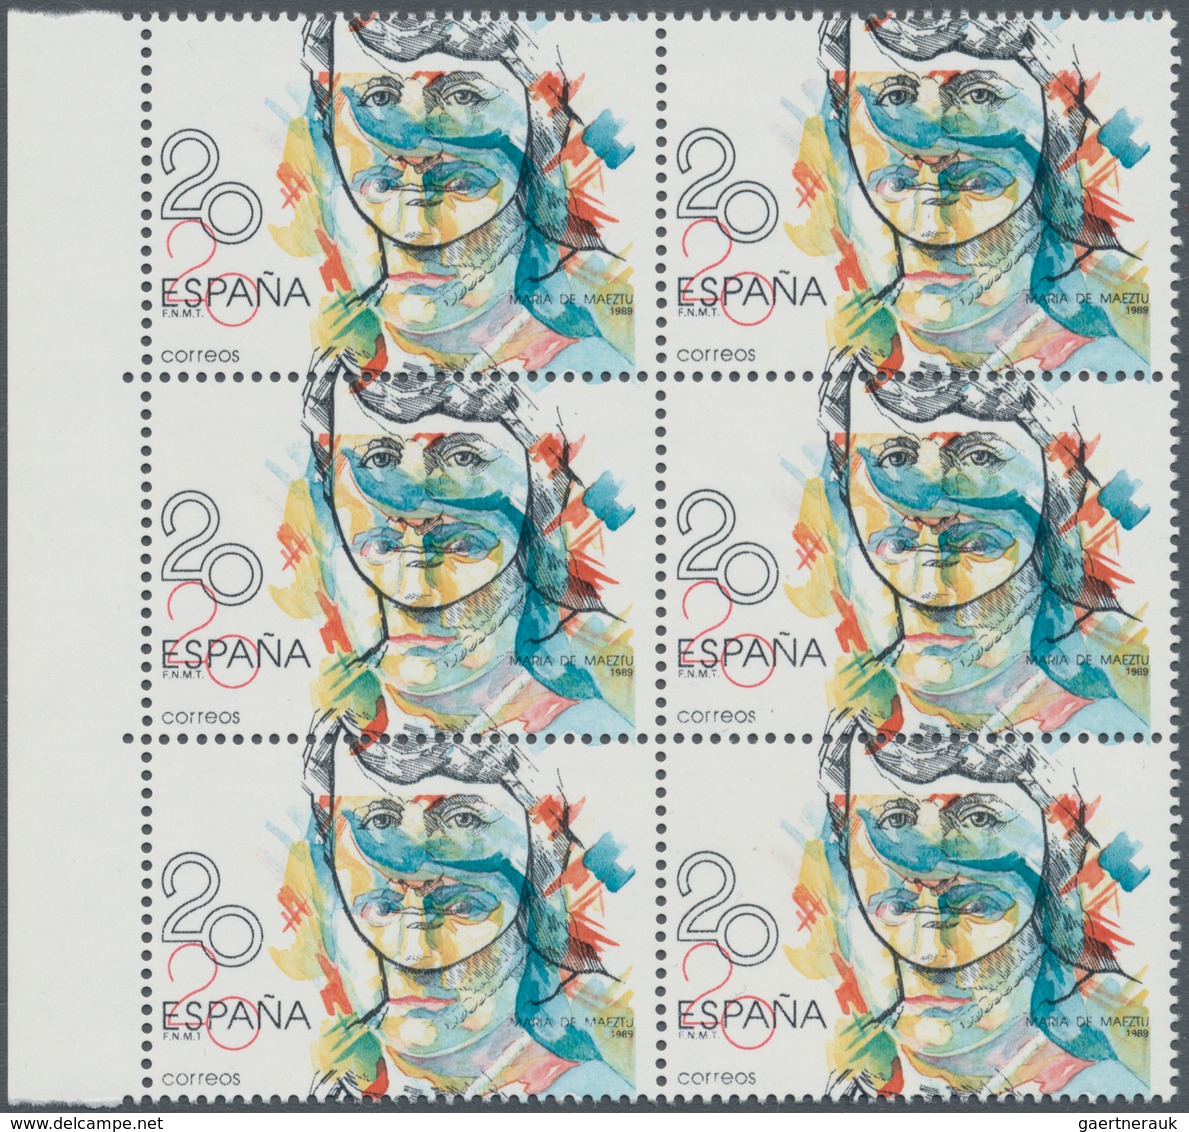 Spanien: 1988, Prominent Woman 20pta. ‚Maria De Maeztu‘ In A Lot With About 250 Stamps All With ERRO - Briefe U. Dokumente